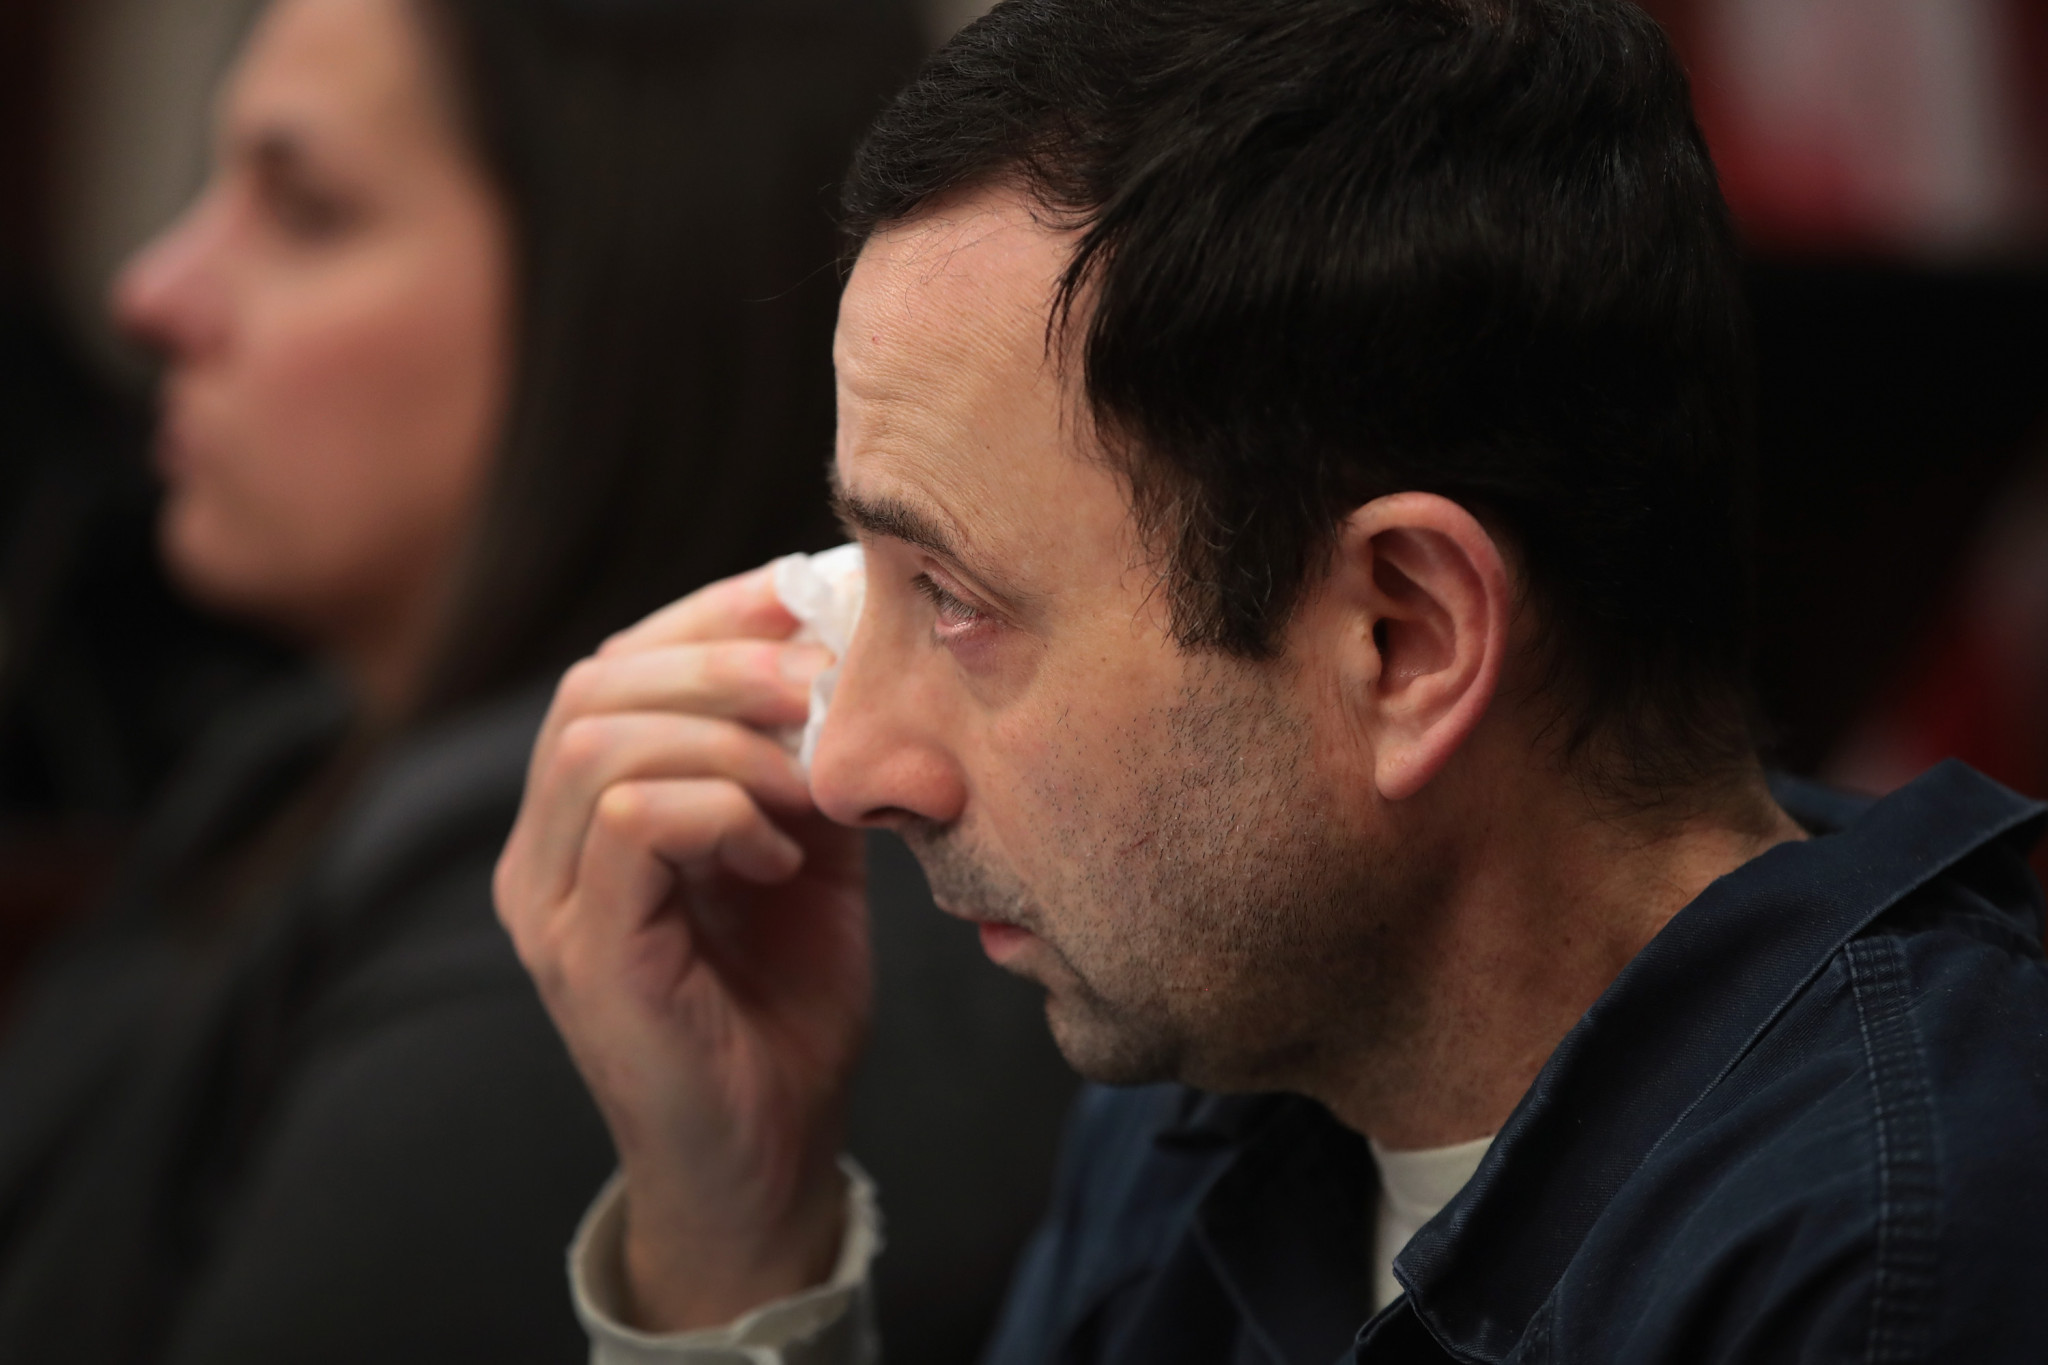 Judge rebukes Nassar after he claims listening to sex abuse victims is too difficult